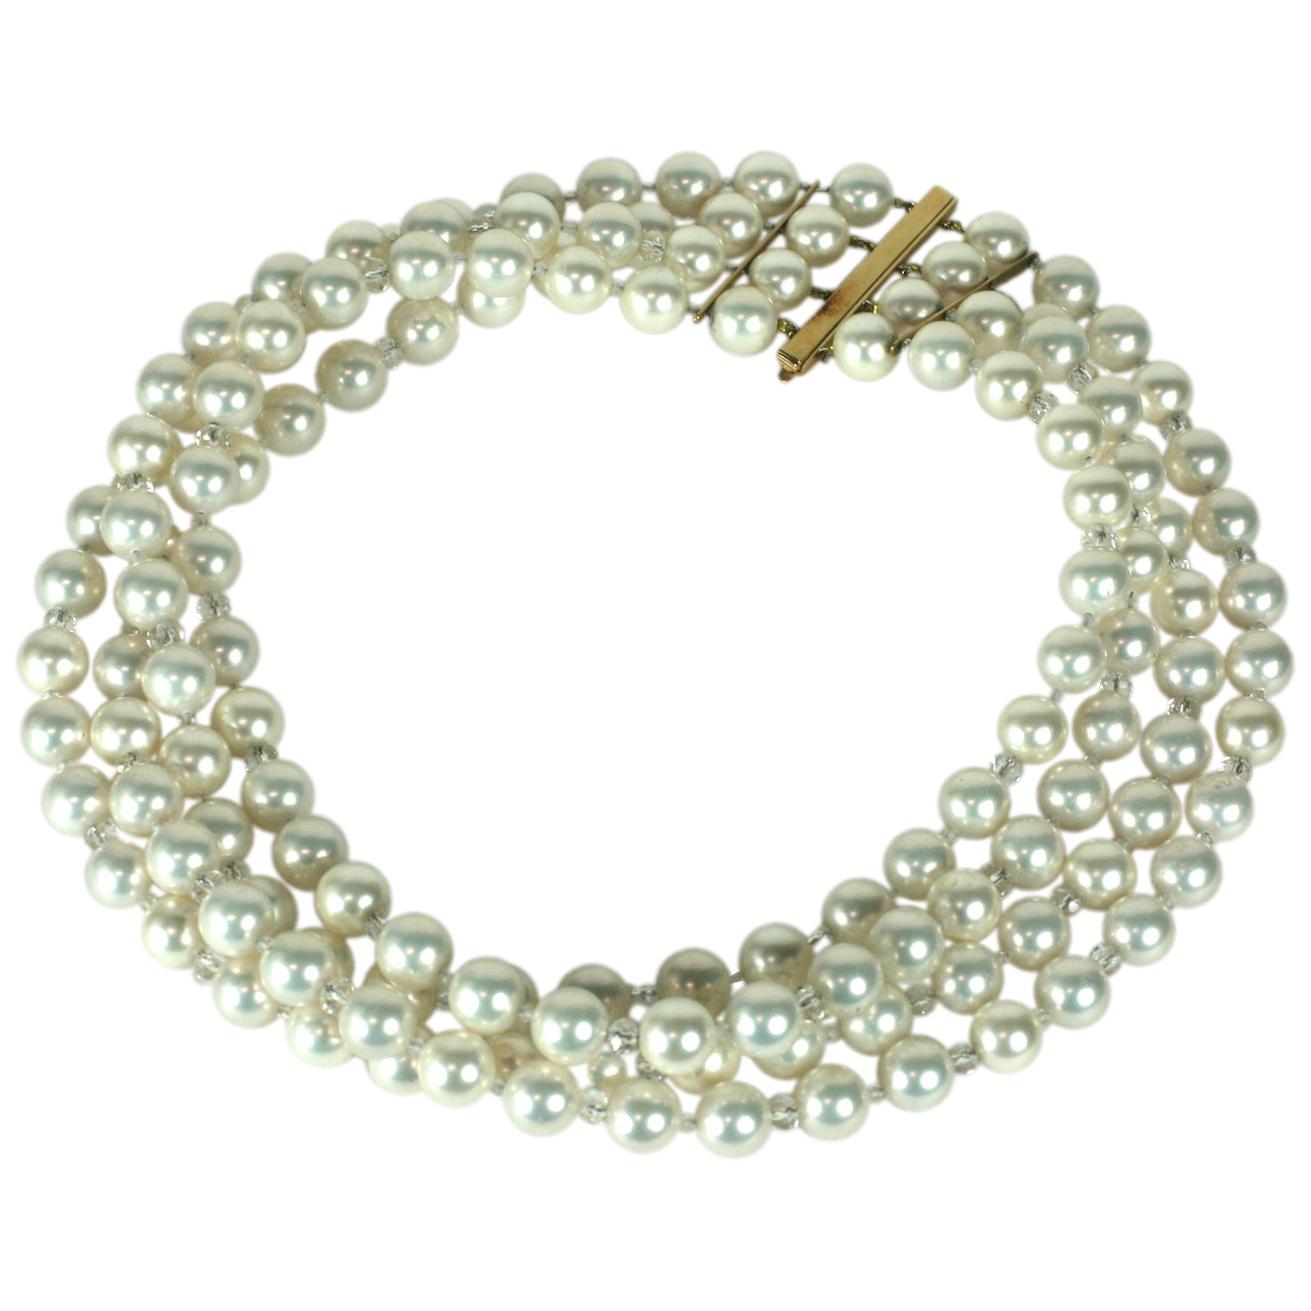 Oversized Faux Pearl and Gold Collar